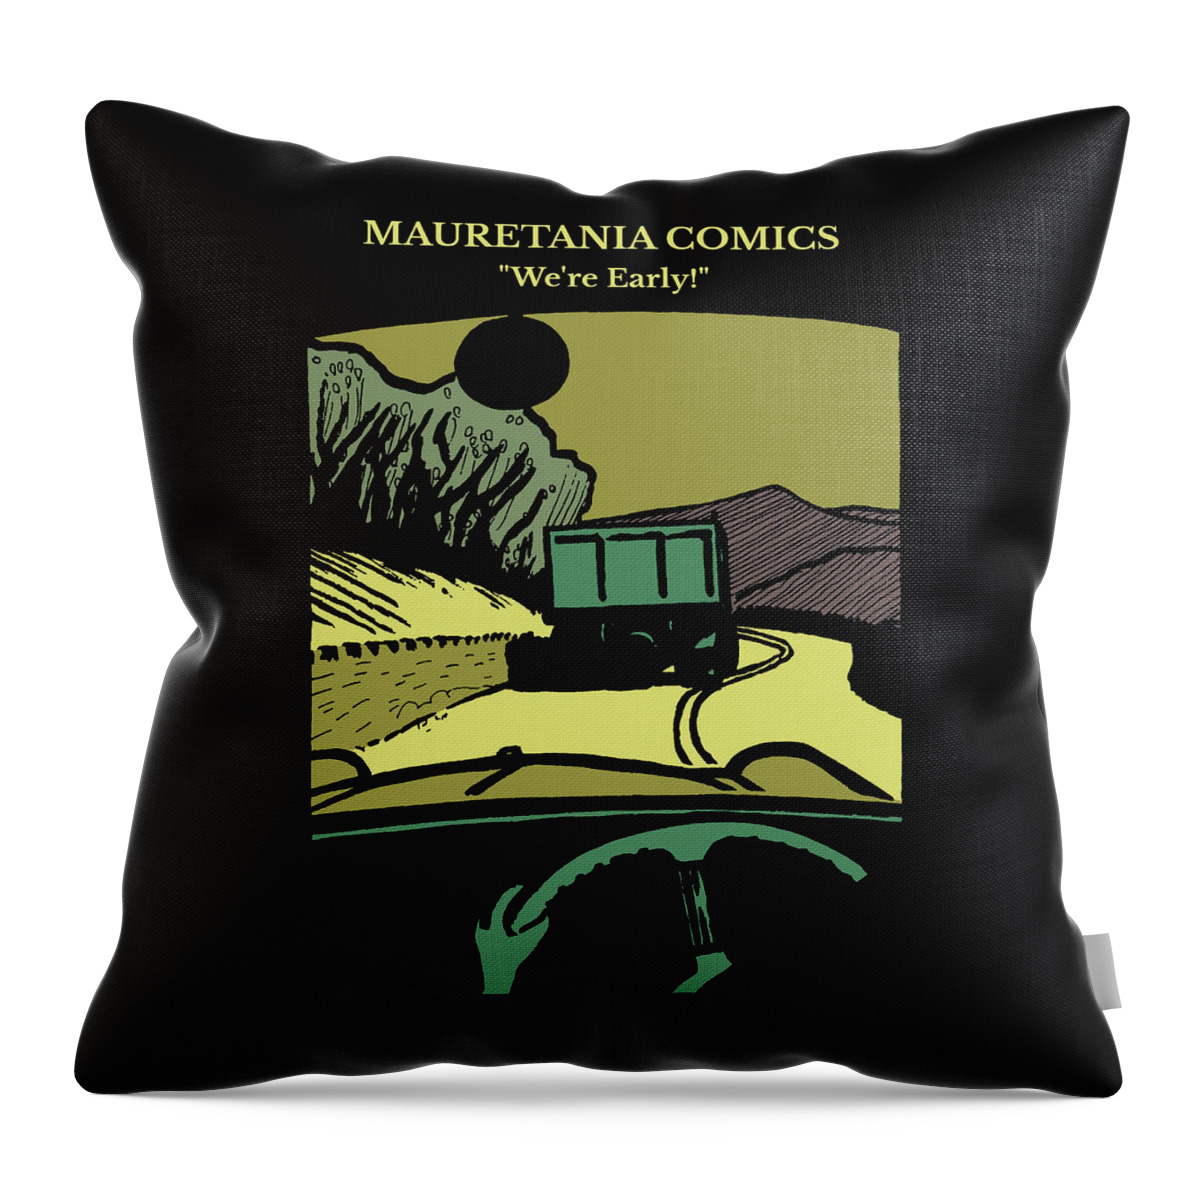 Mauretania Comics Throw Pillow featuring the digital art We are Early by Chris Reynolds